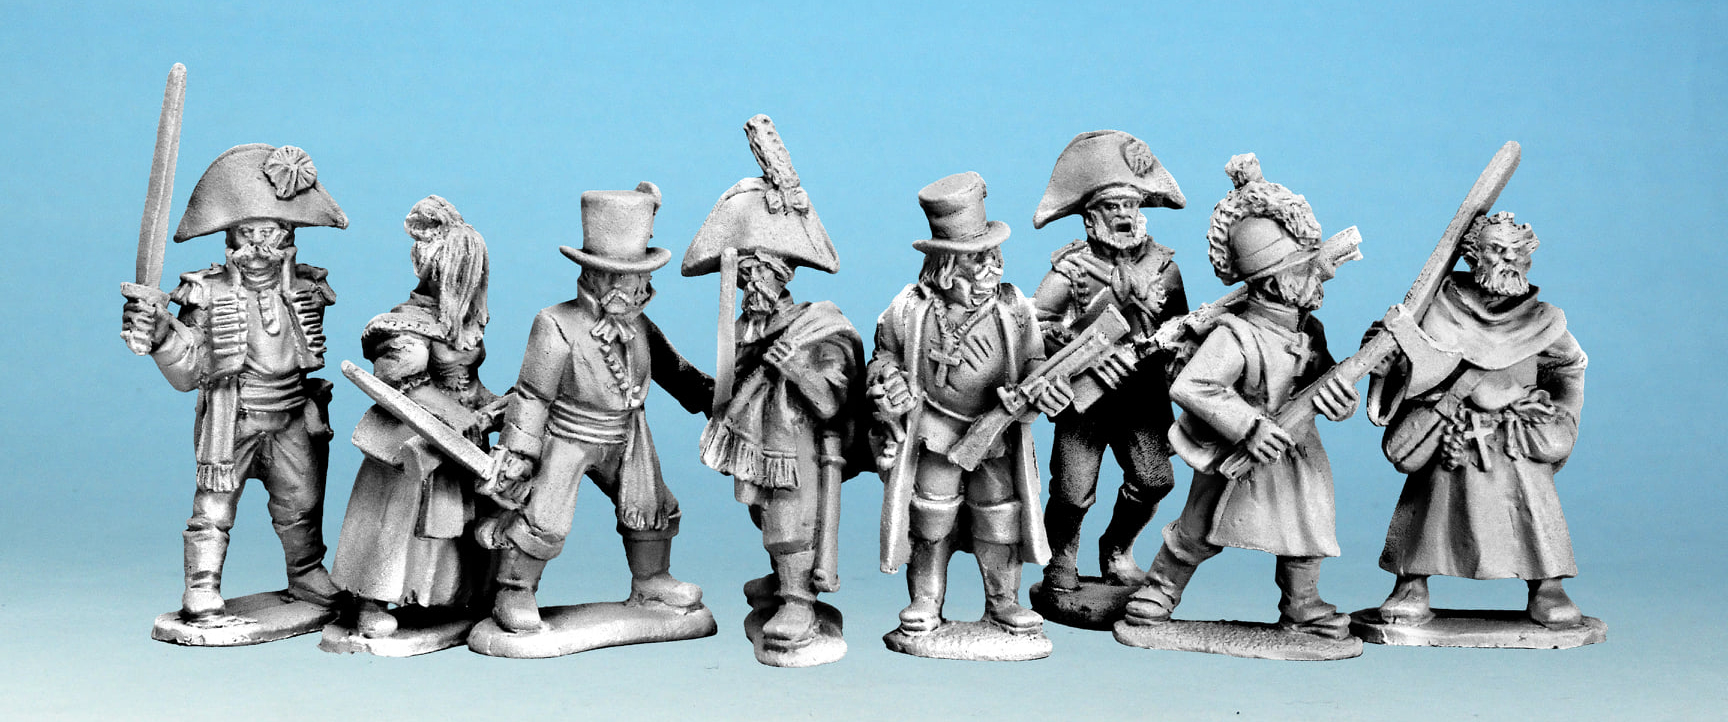 Silver Bayonet Previews #3 - North Star Military Figures